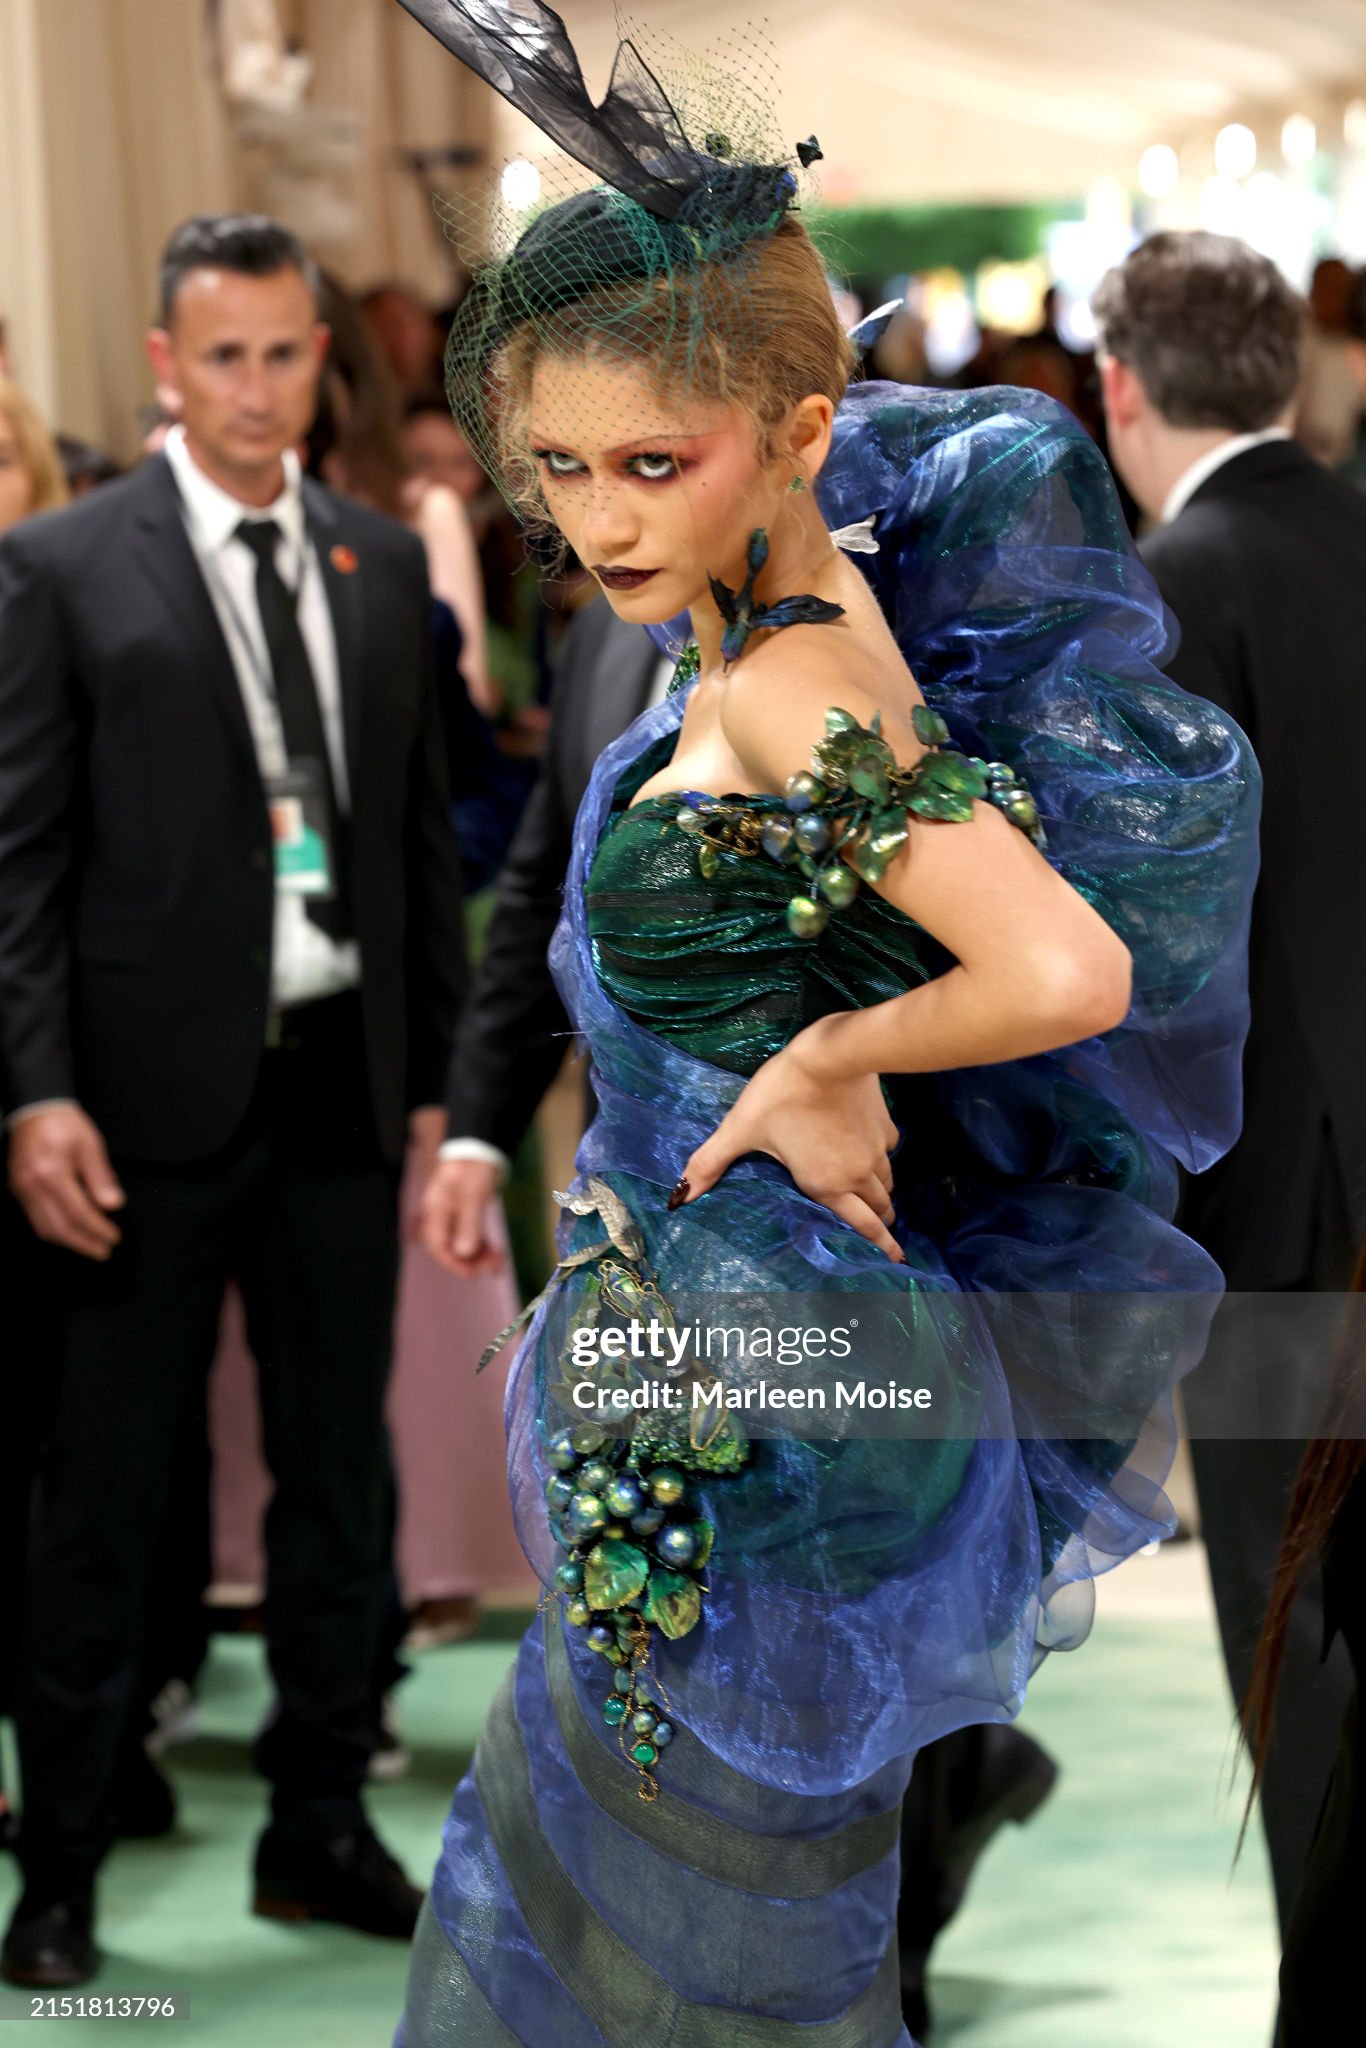 gettyimages-2151813796-2048x2048.jpg